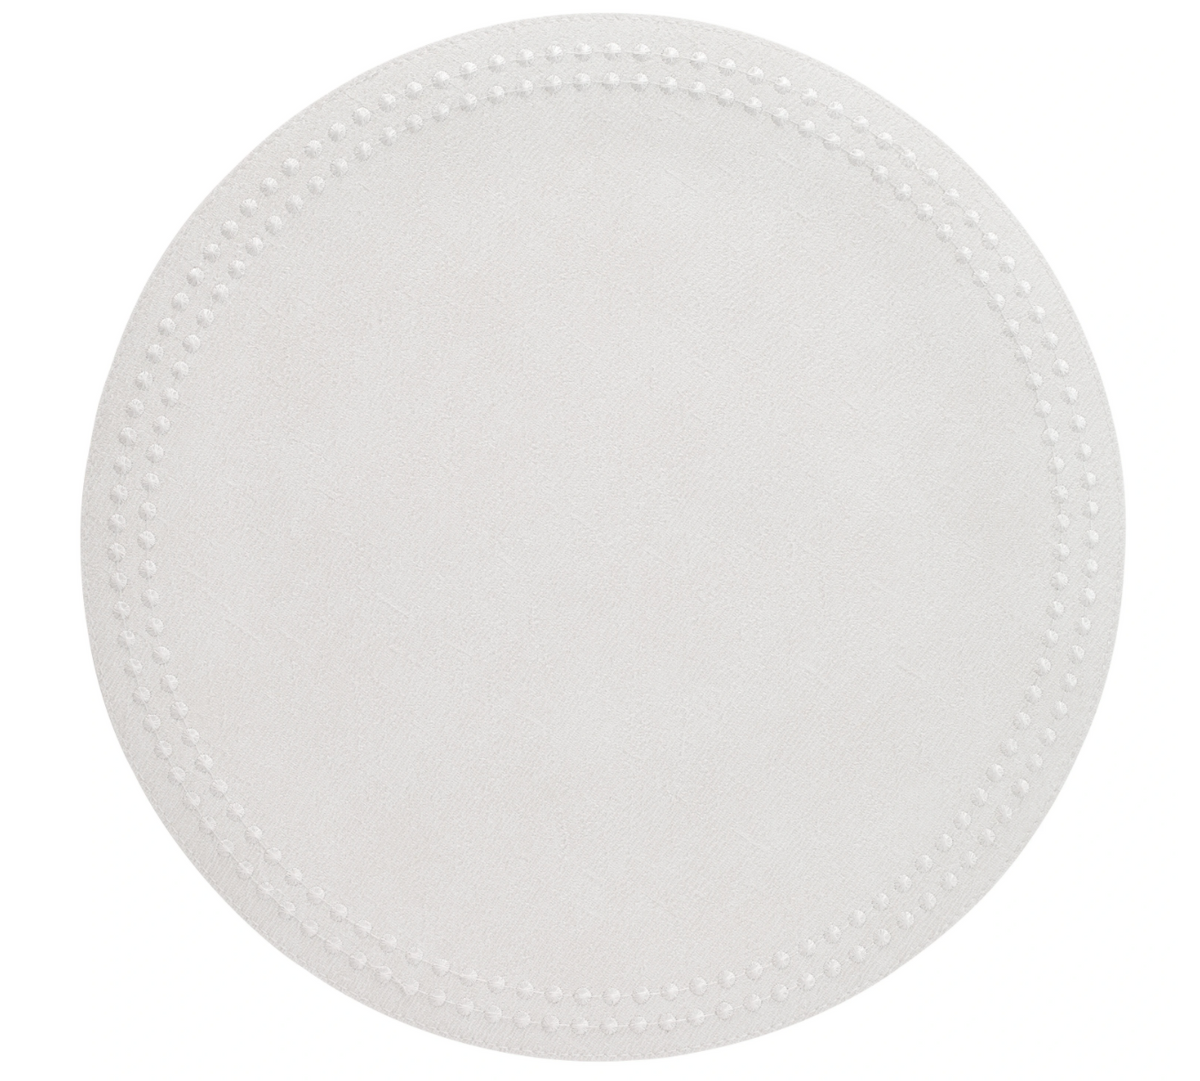 Bodrum Pearls Round Placemat, Set of 4